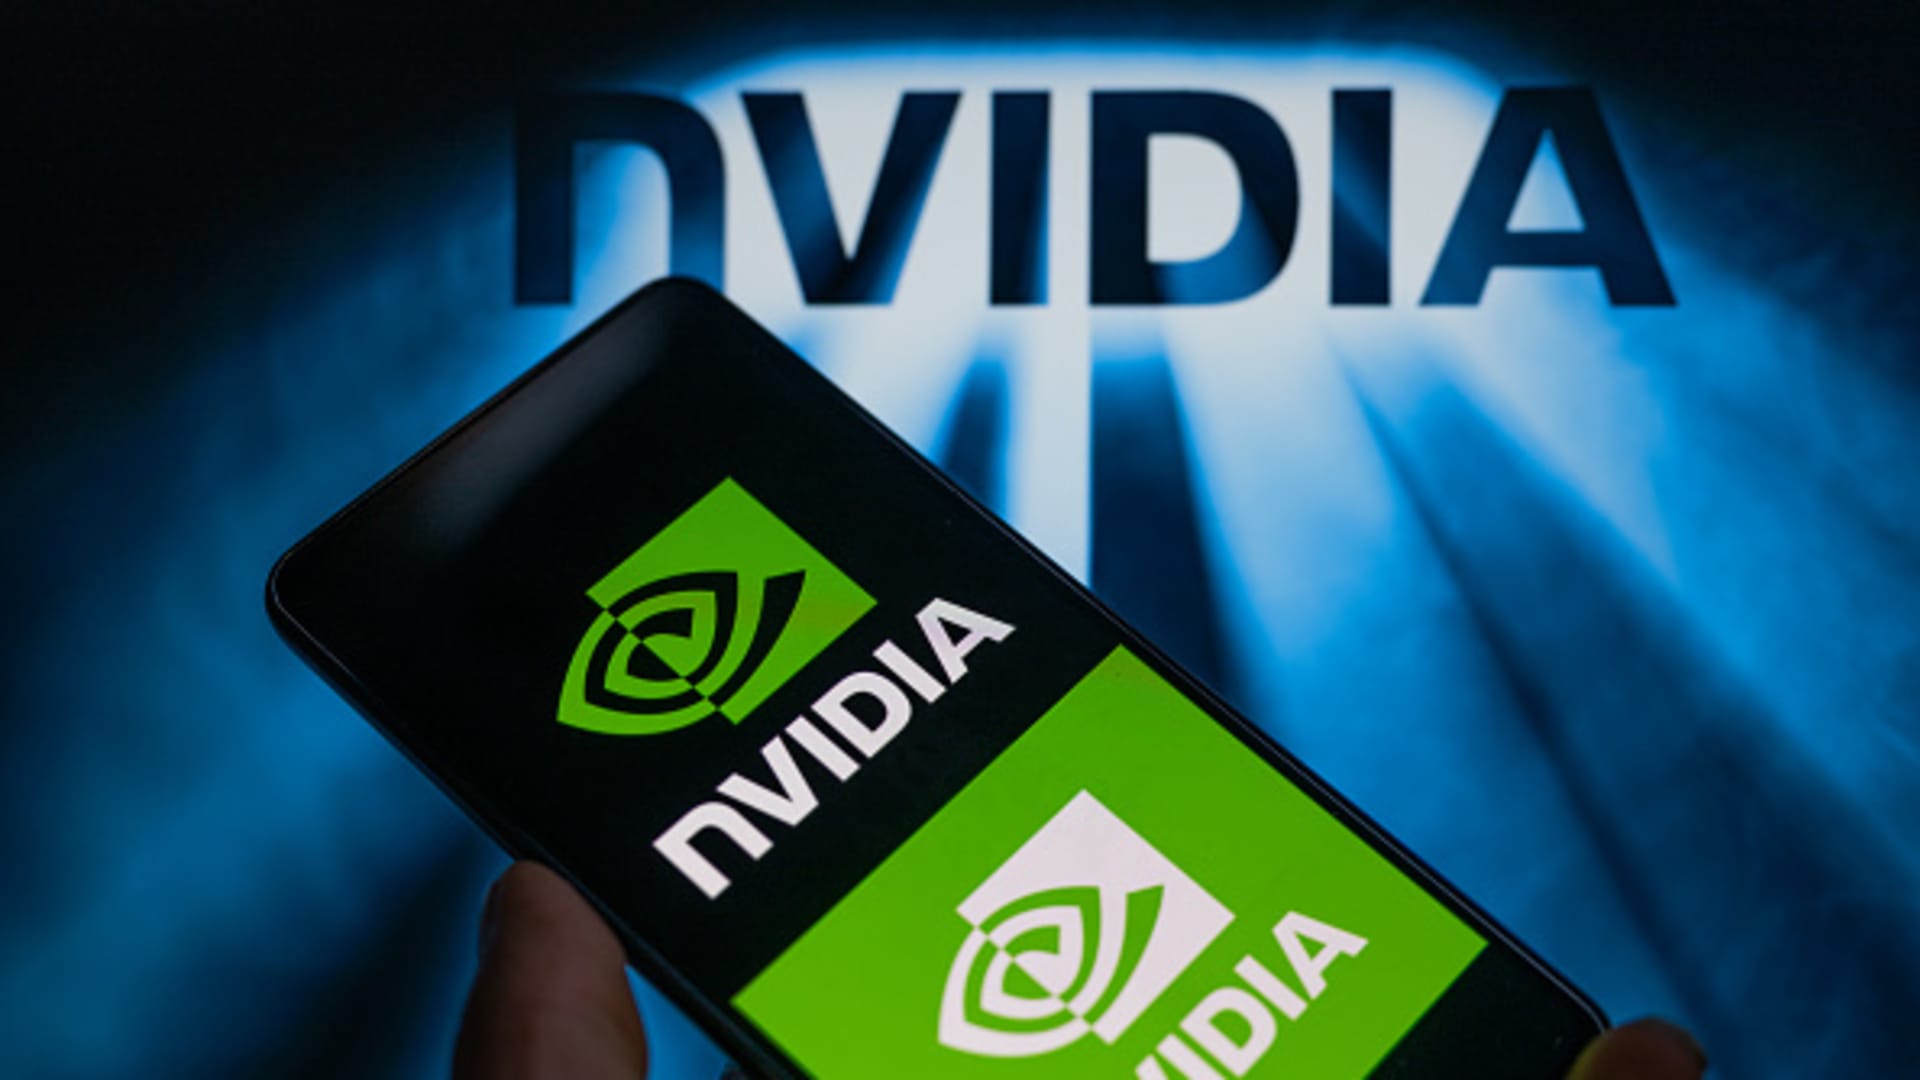 Nvidia’s Data Center business is booming, up more than 400% since last ...